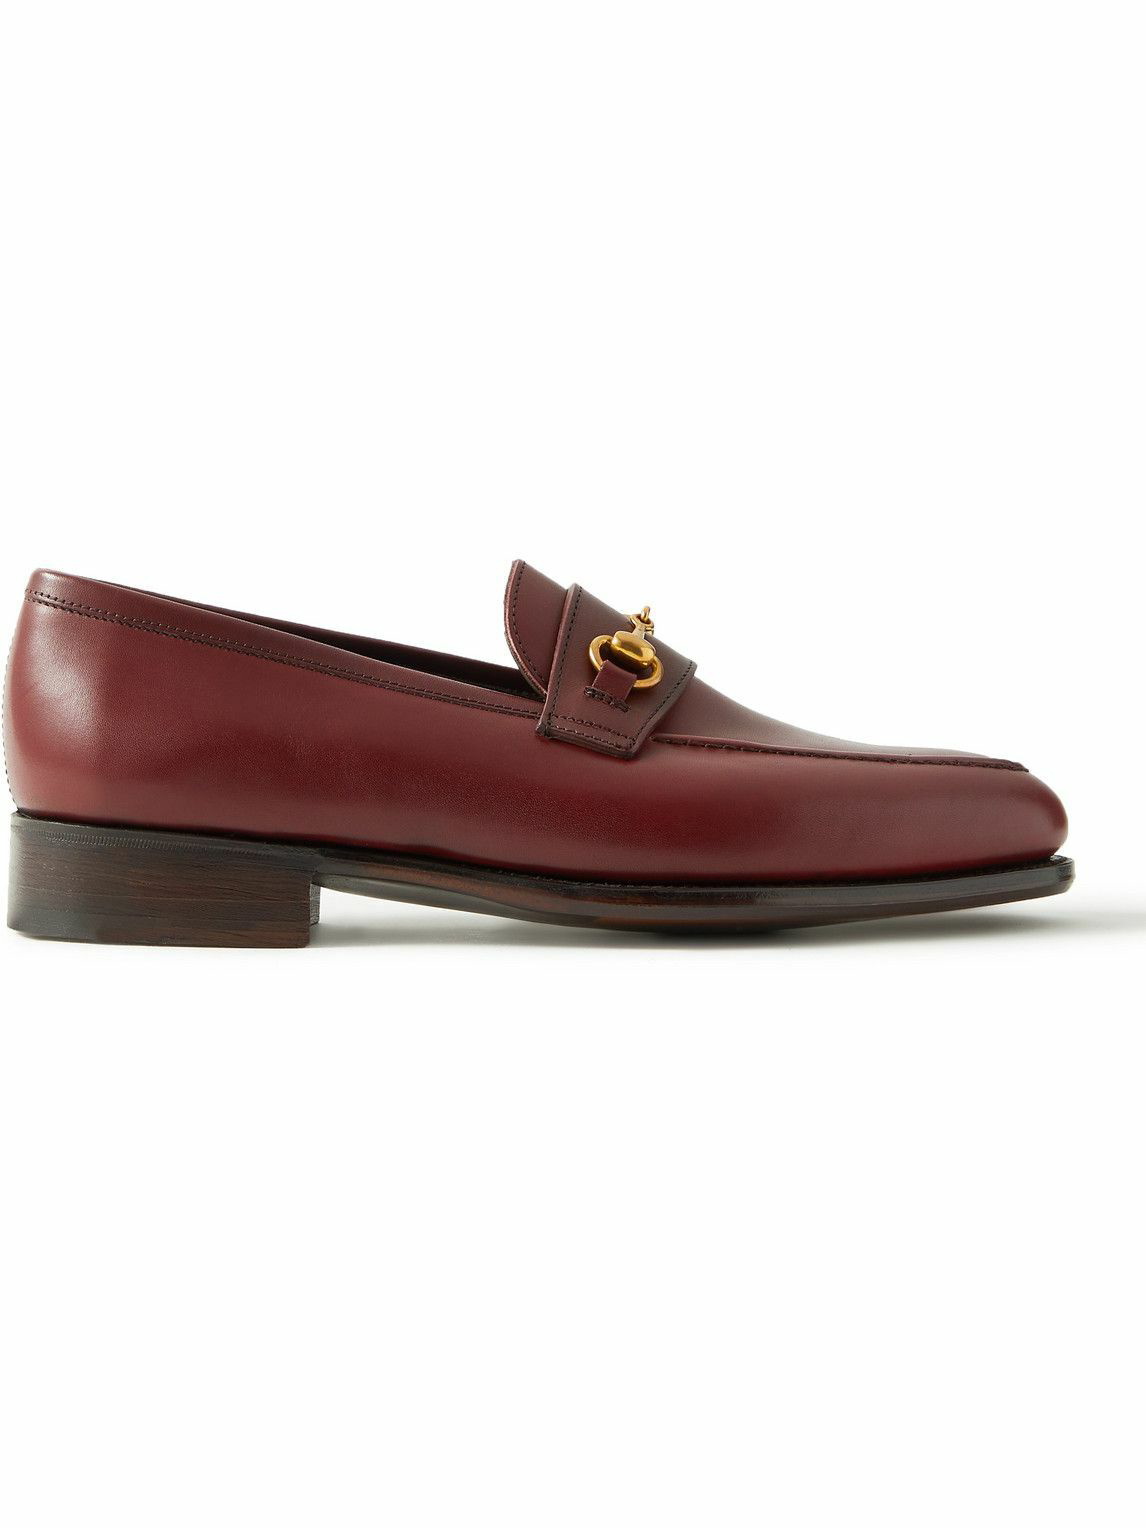 George Cleverley - Colony Horsebit Leather Loafers - Burgundy George ...